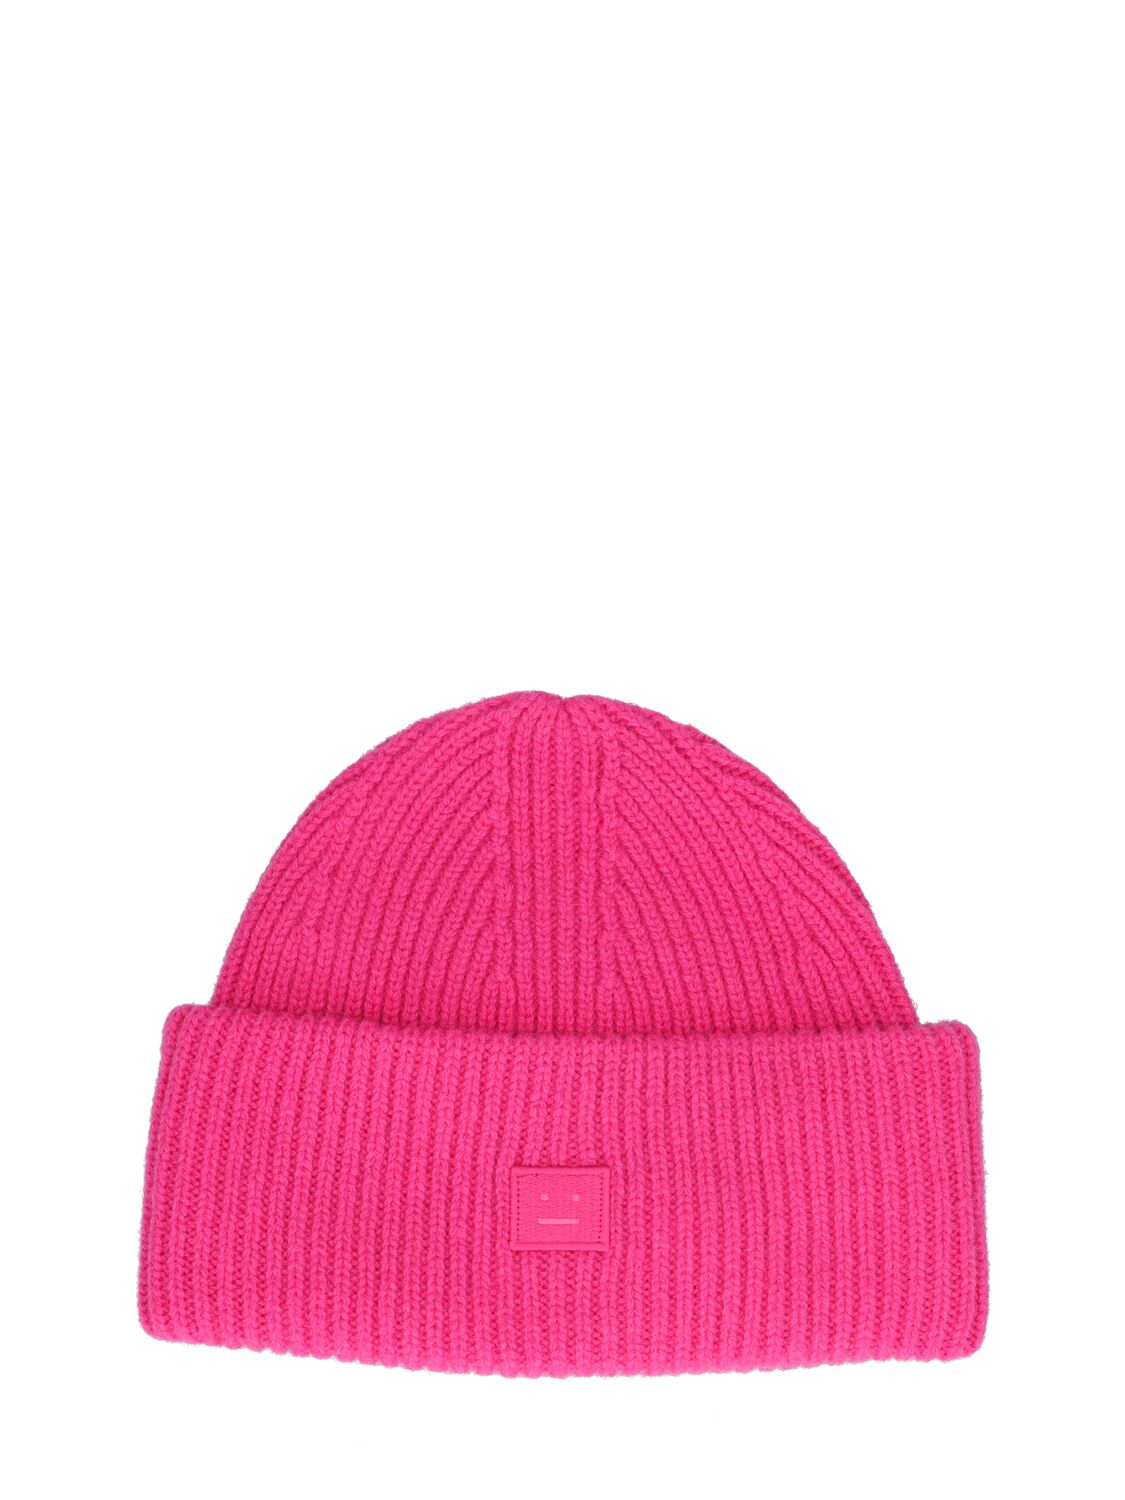 Acne Studios Pana Face Wool Beanie In Bright Pink